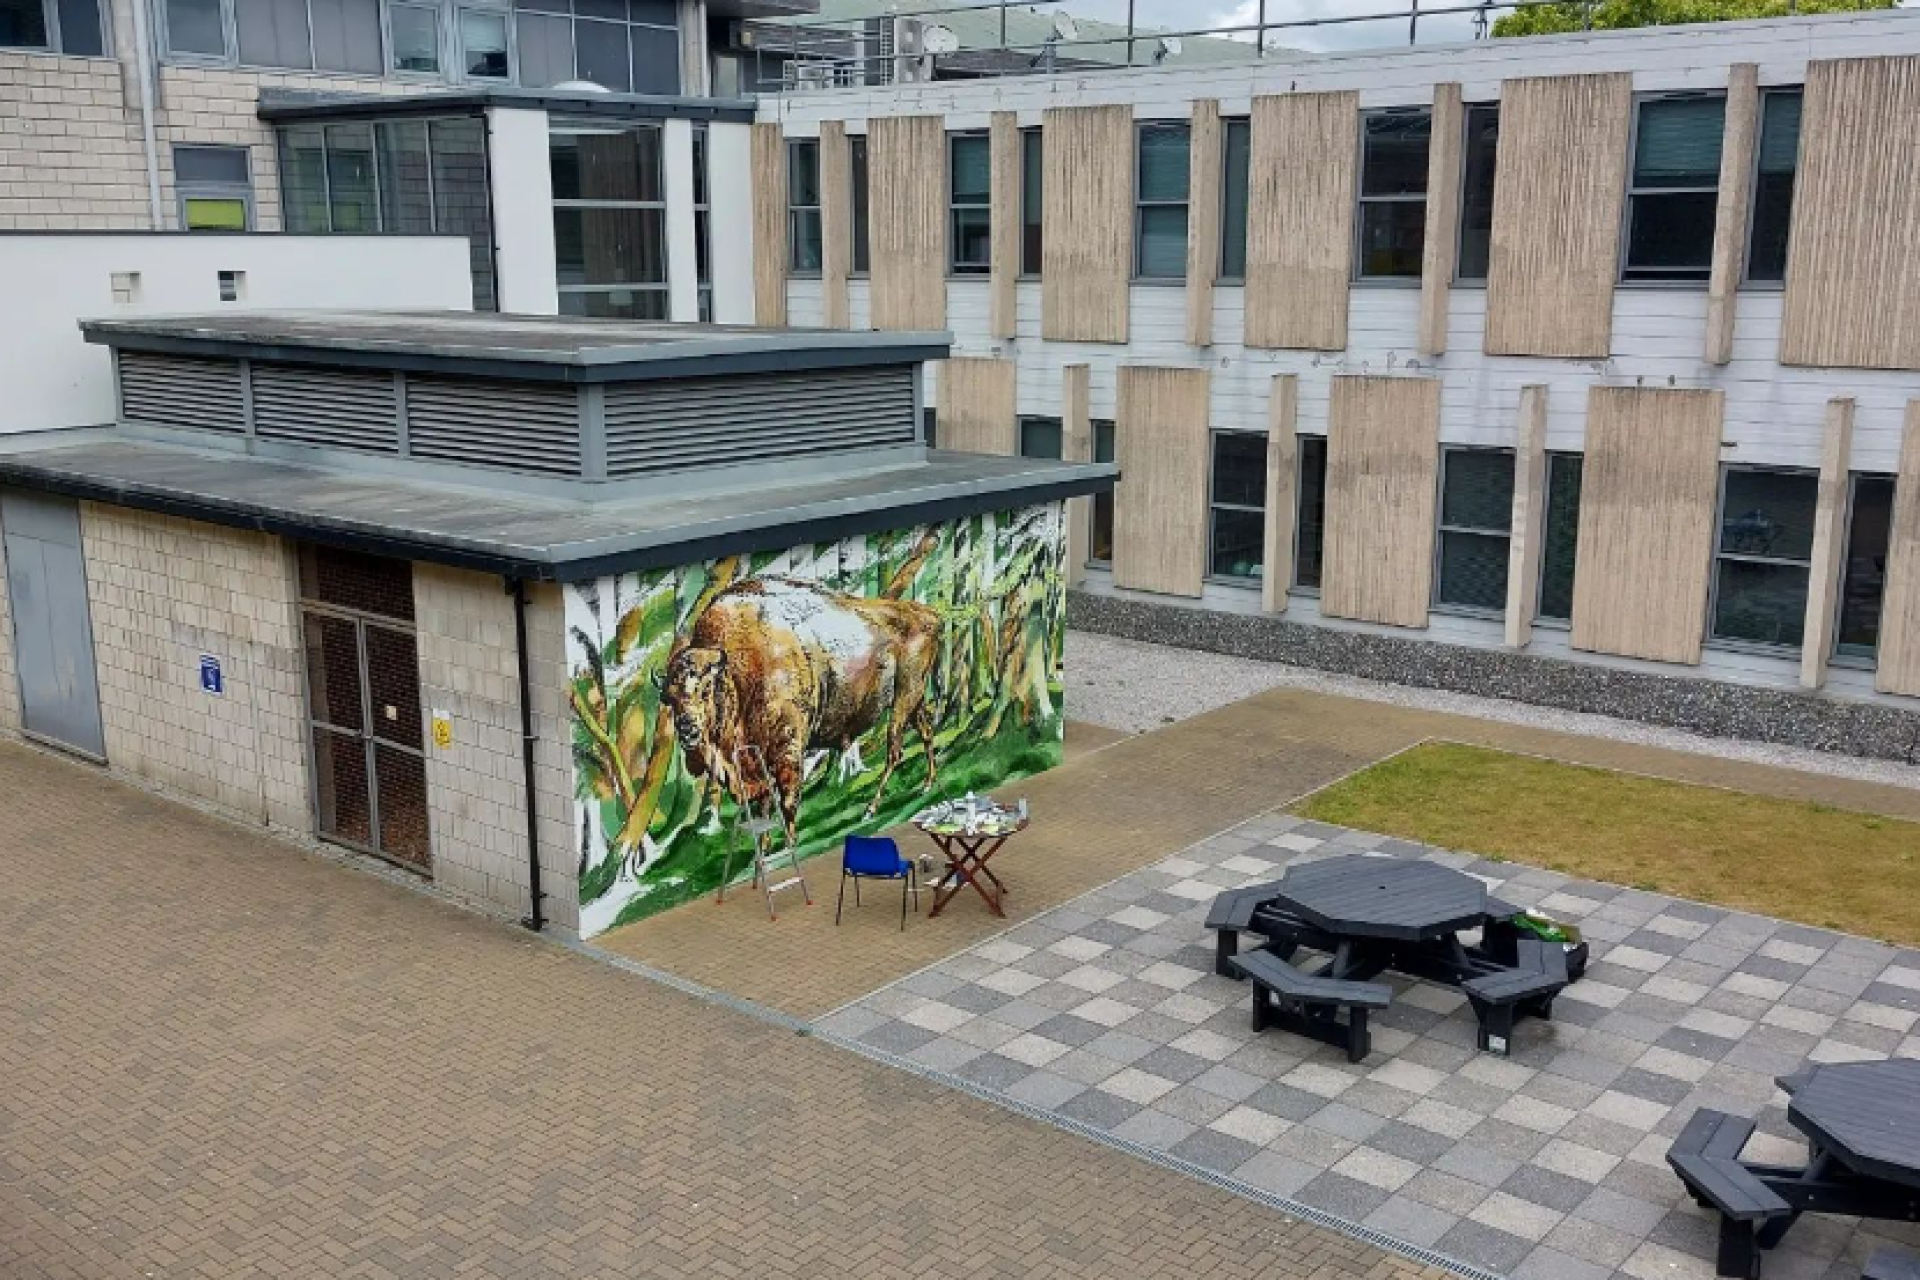 A Bison mural on a brick wall, near a building and benches.